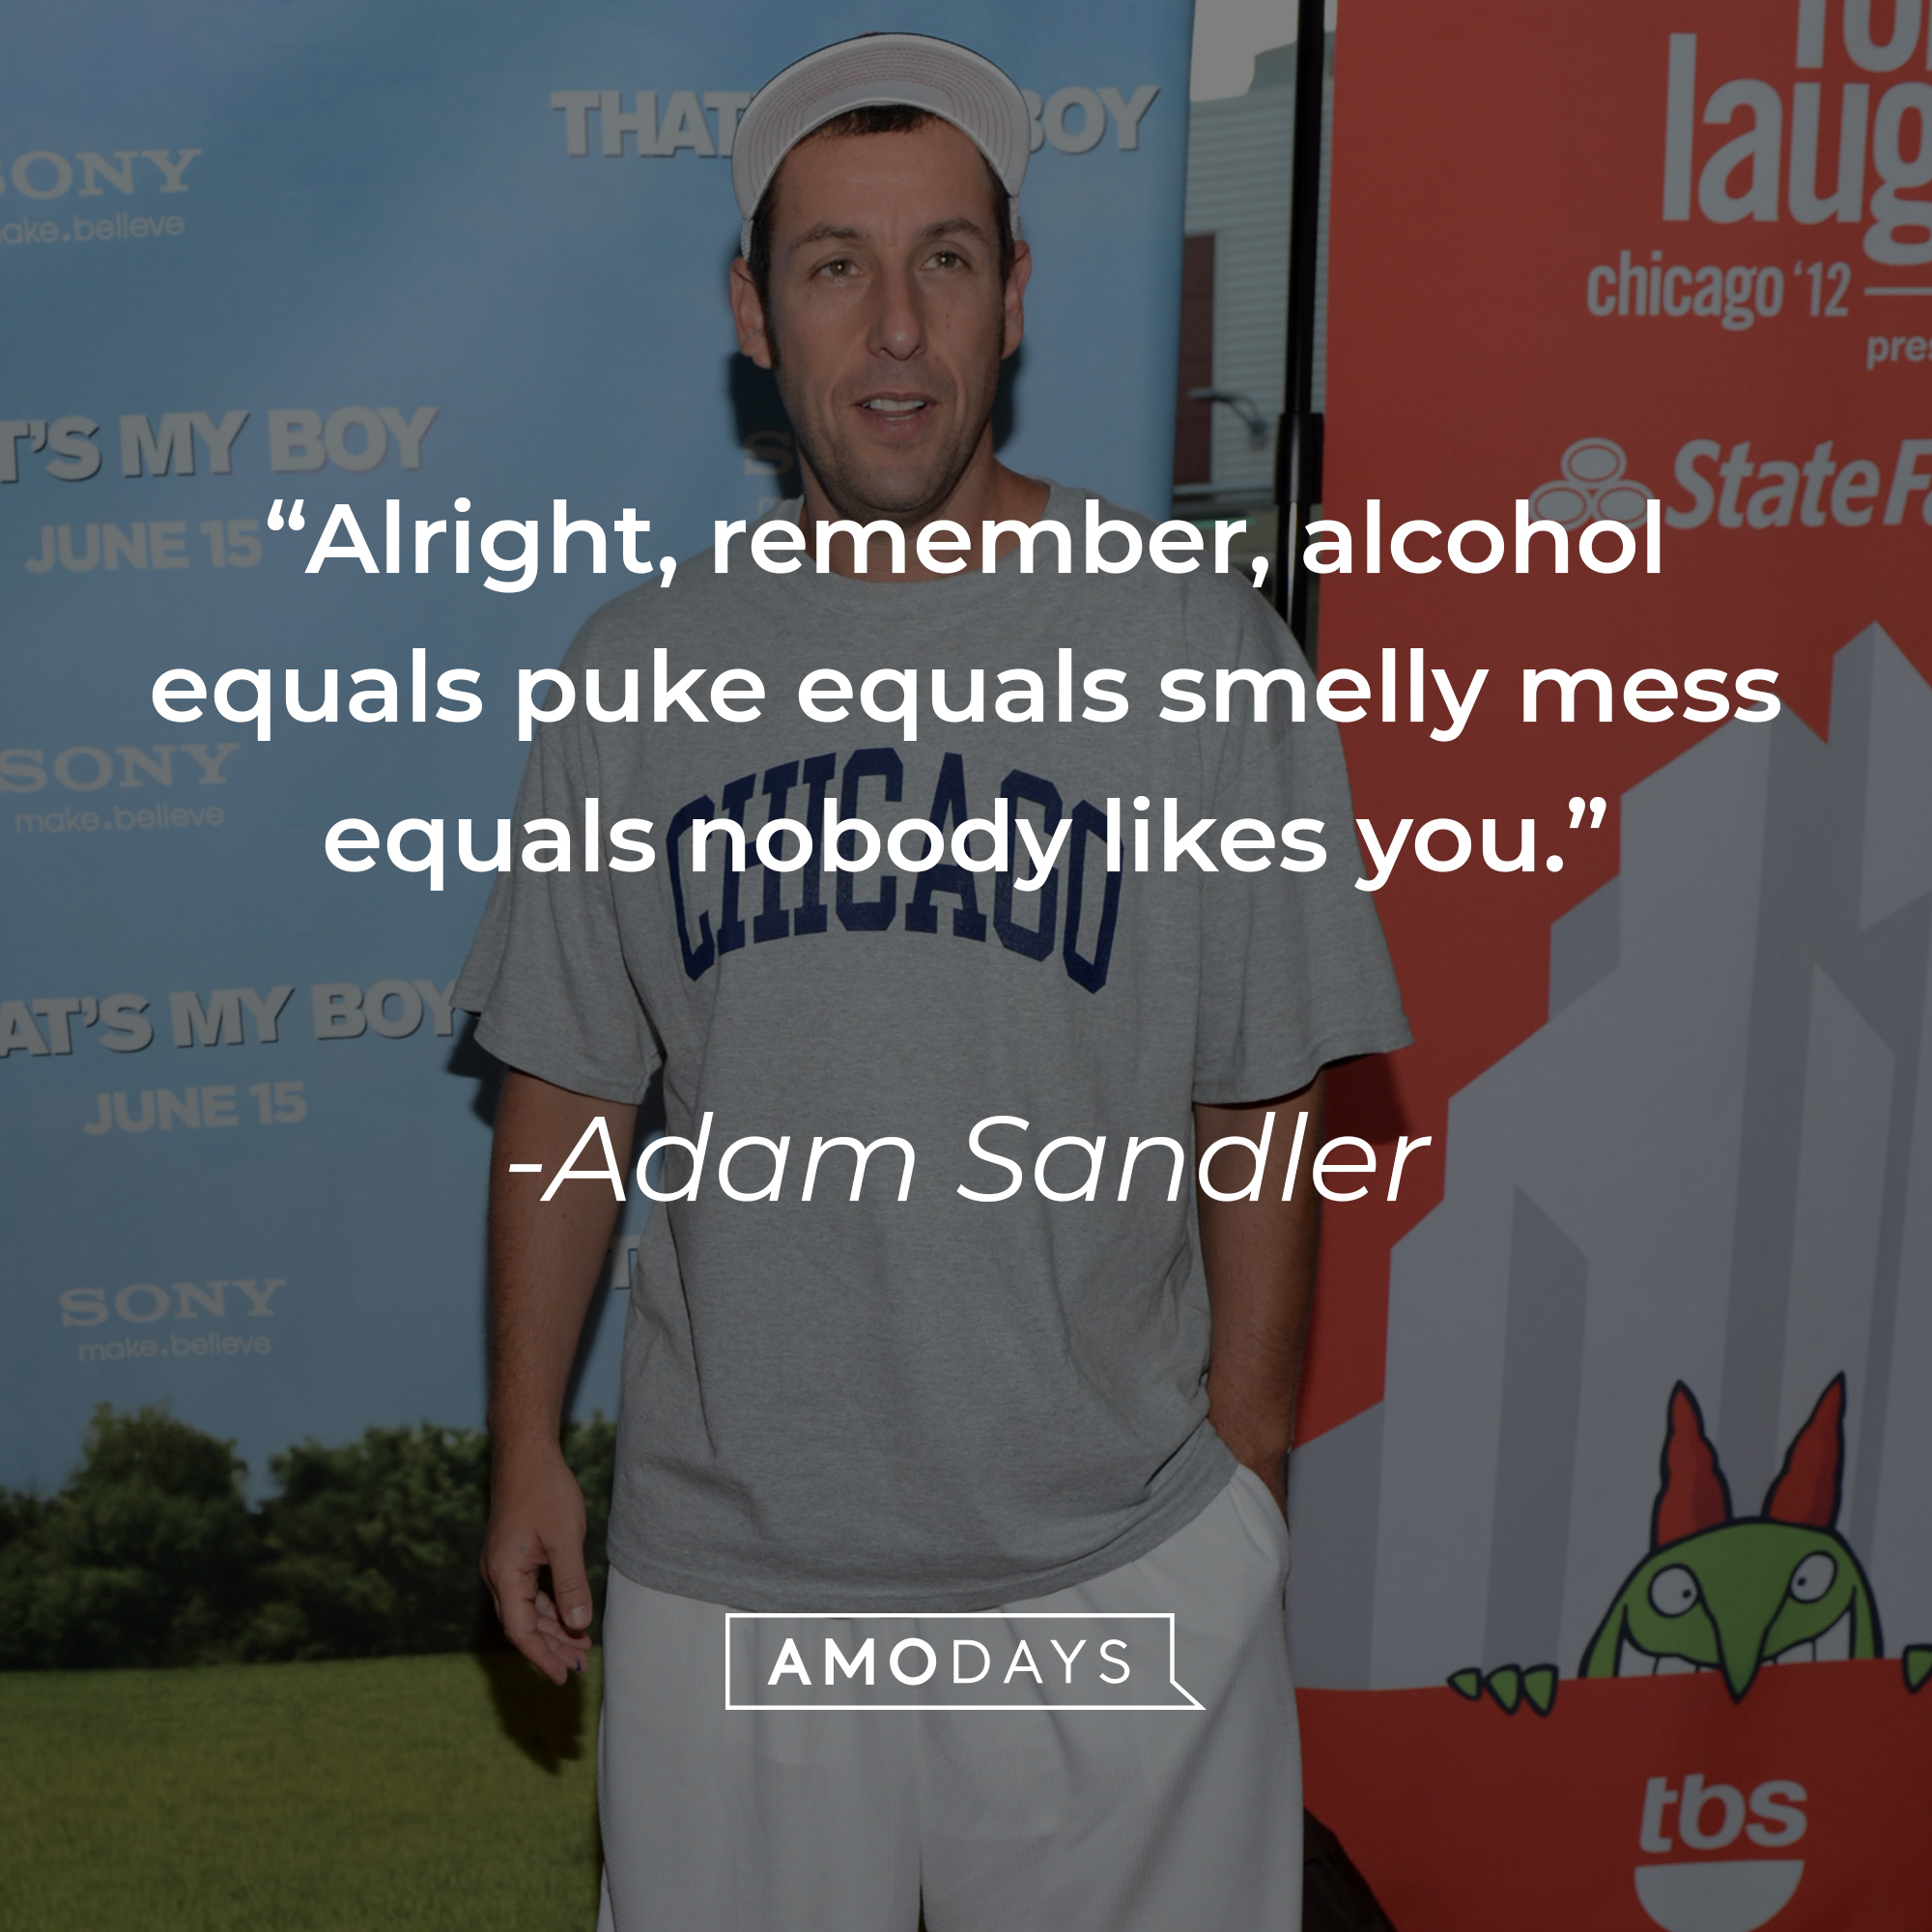 Adam Sandler's quote: “Alright, remember, alcohol equals puke equals smelly mess equals nobody likes you.” | Source: Getty Images